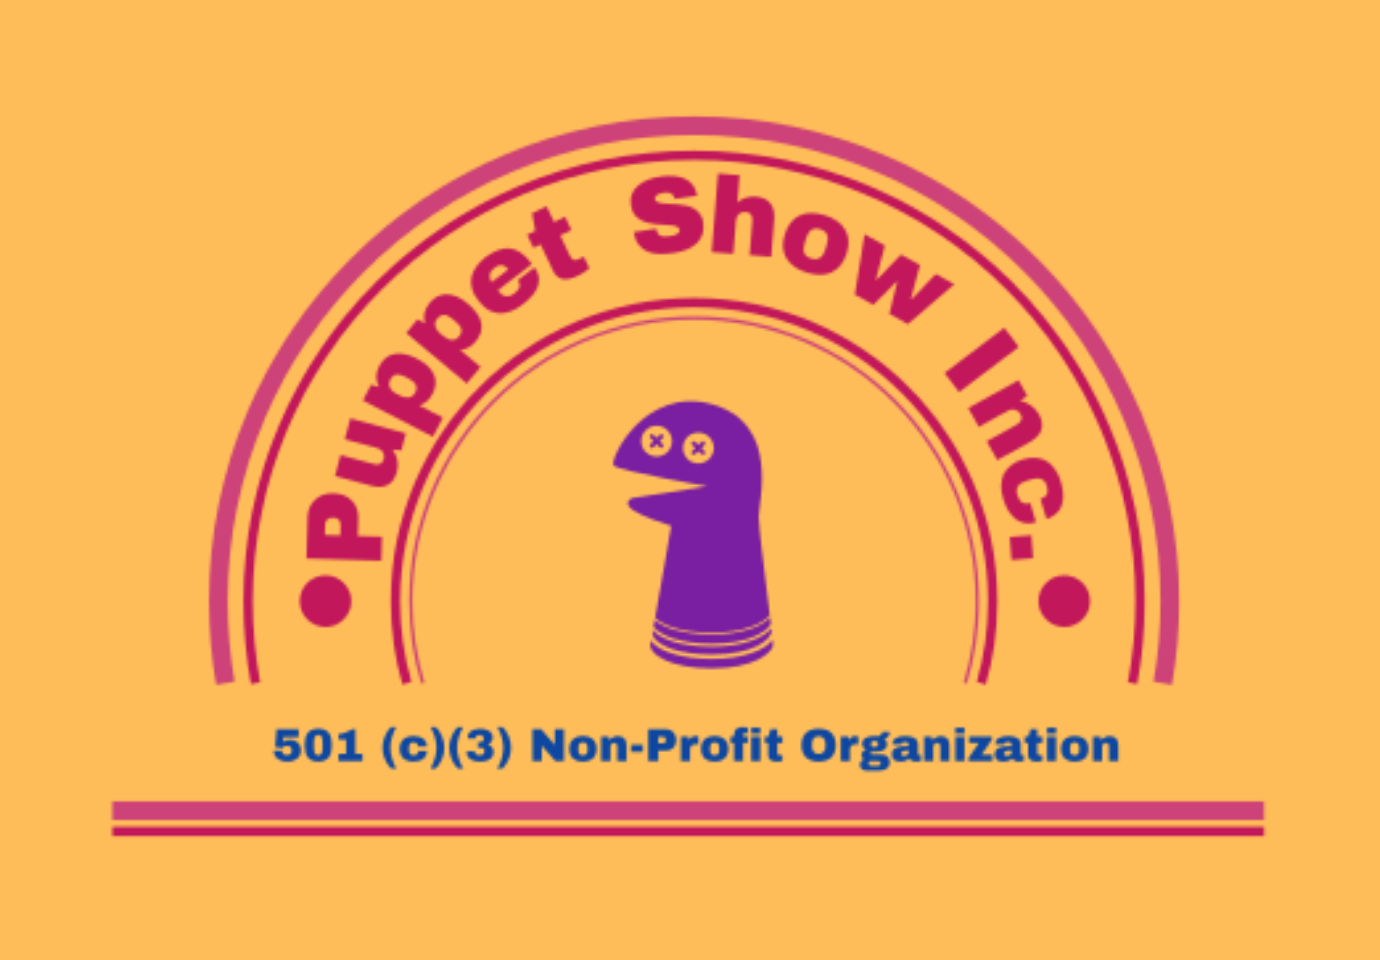 Puppet Show Inc. logo -- yellow background with pink and purple lettering and a little purple sock puppet